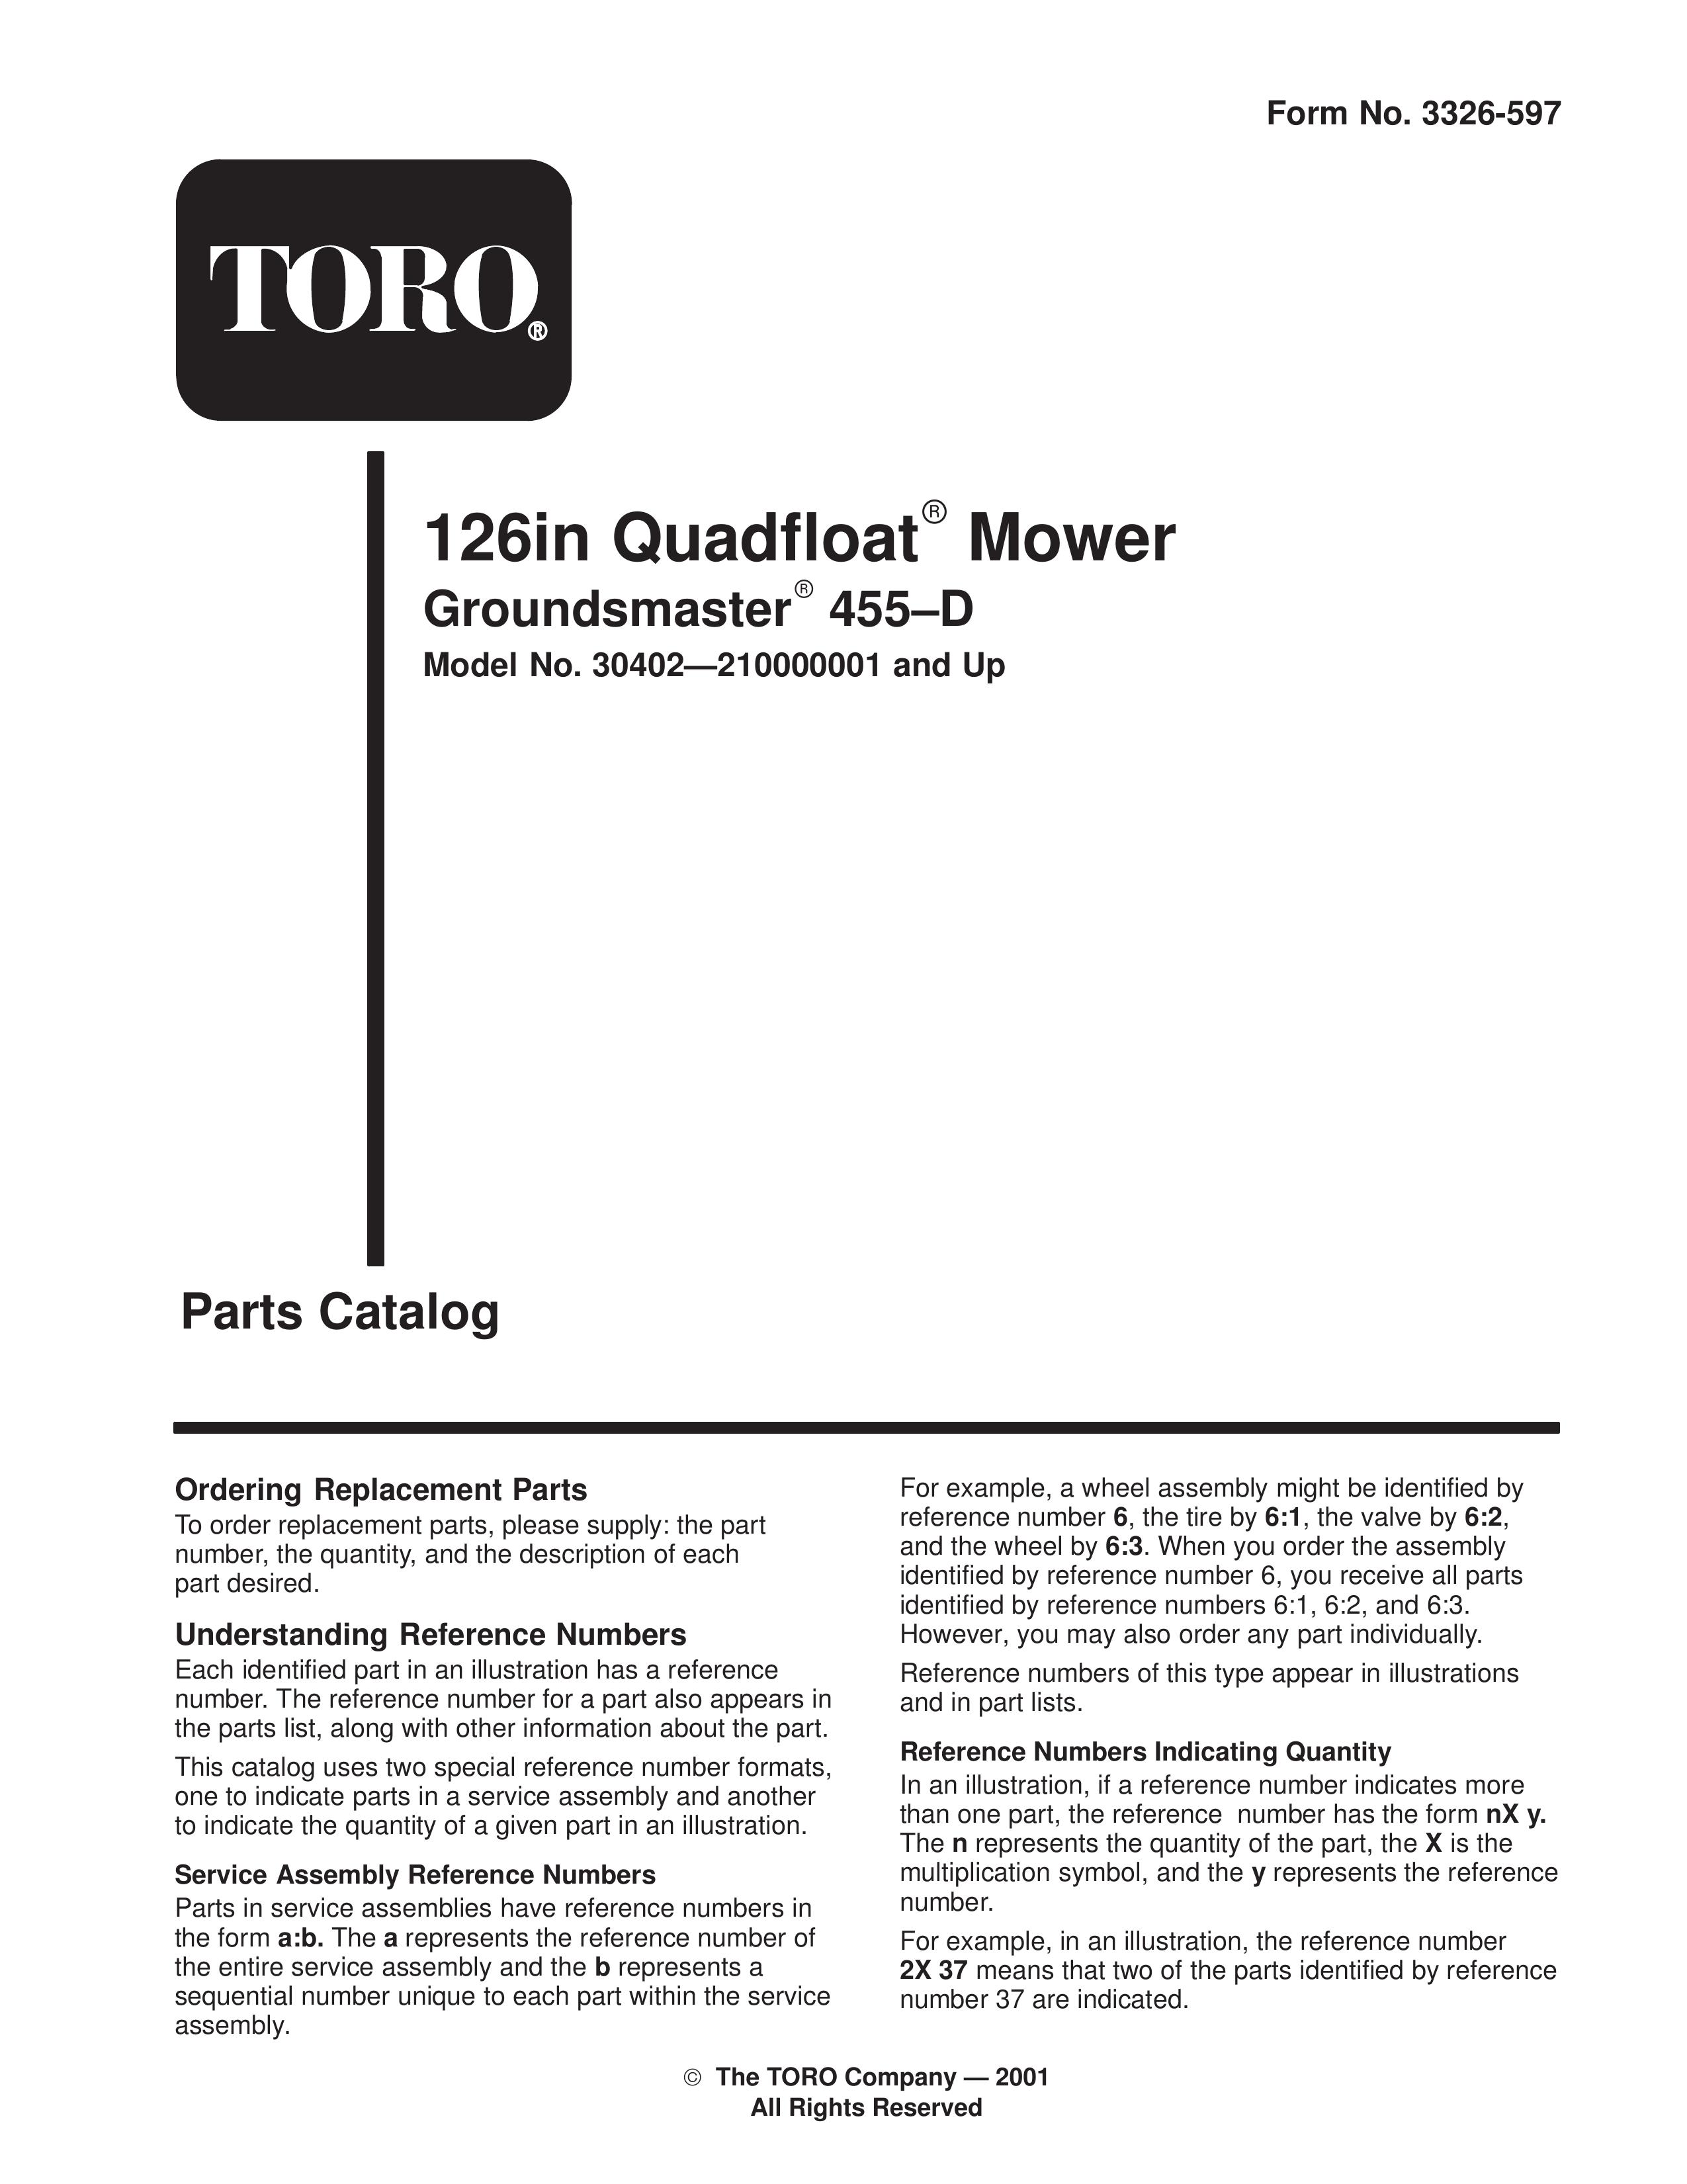 Toro 30402210000001 and Up Trimmer User Manual